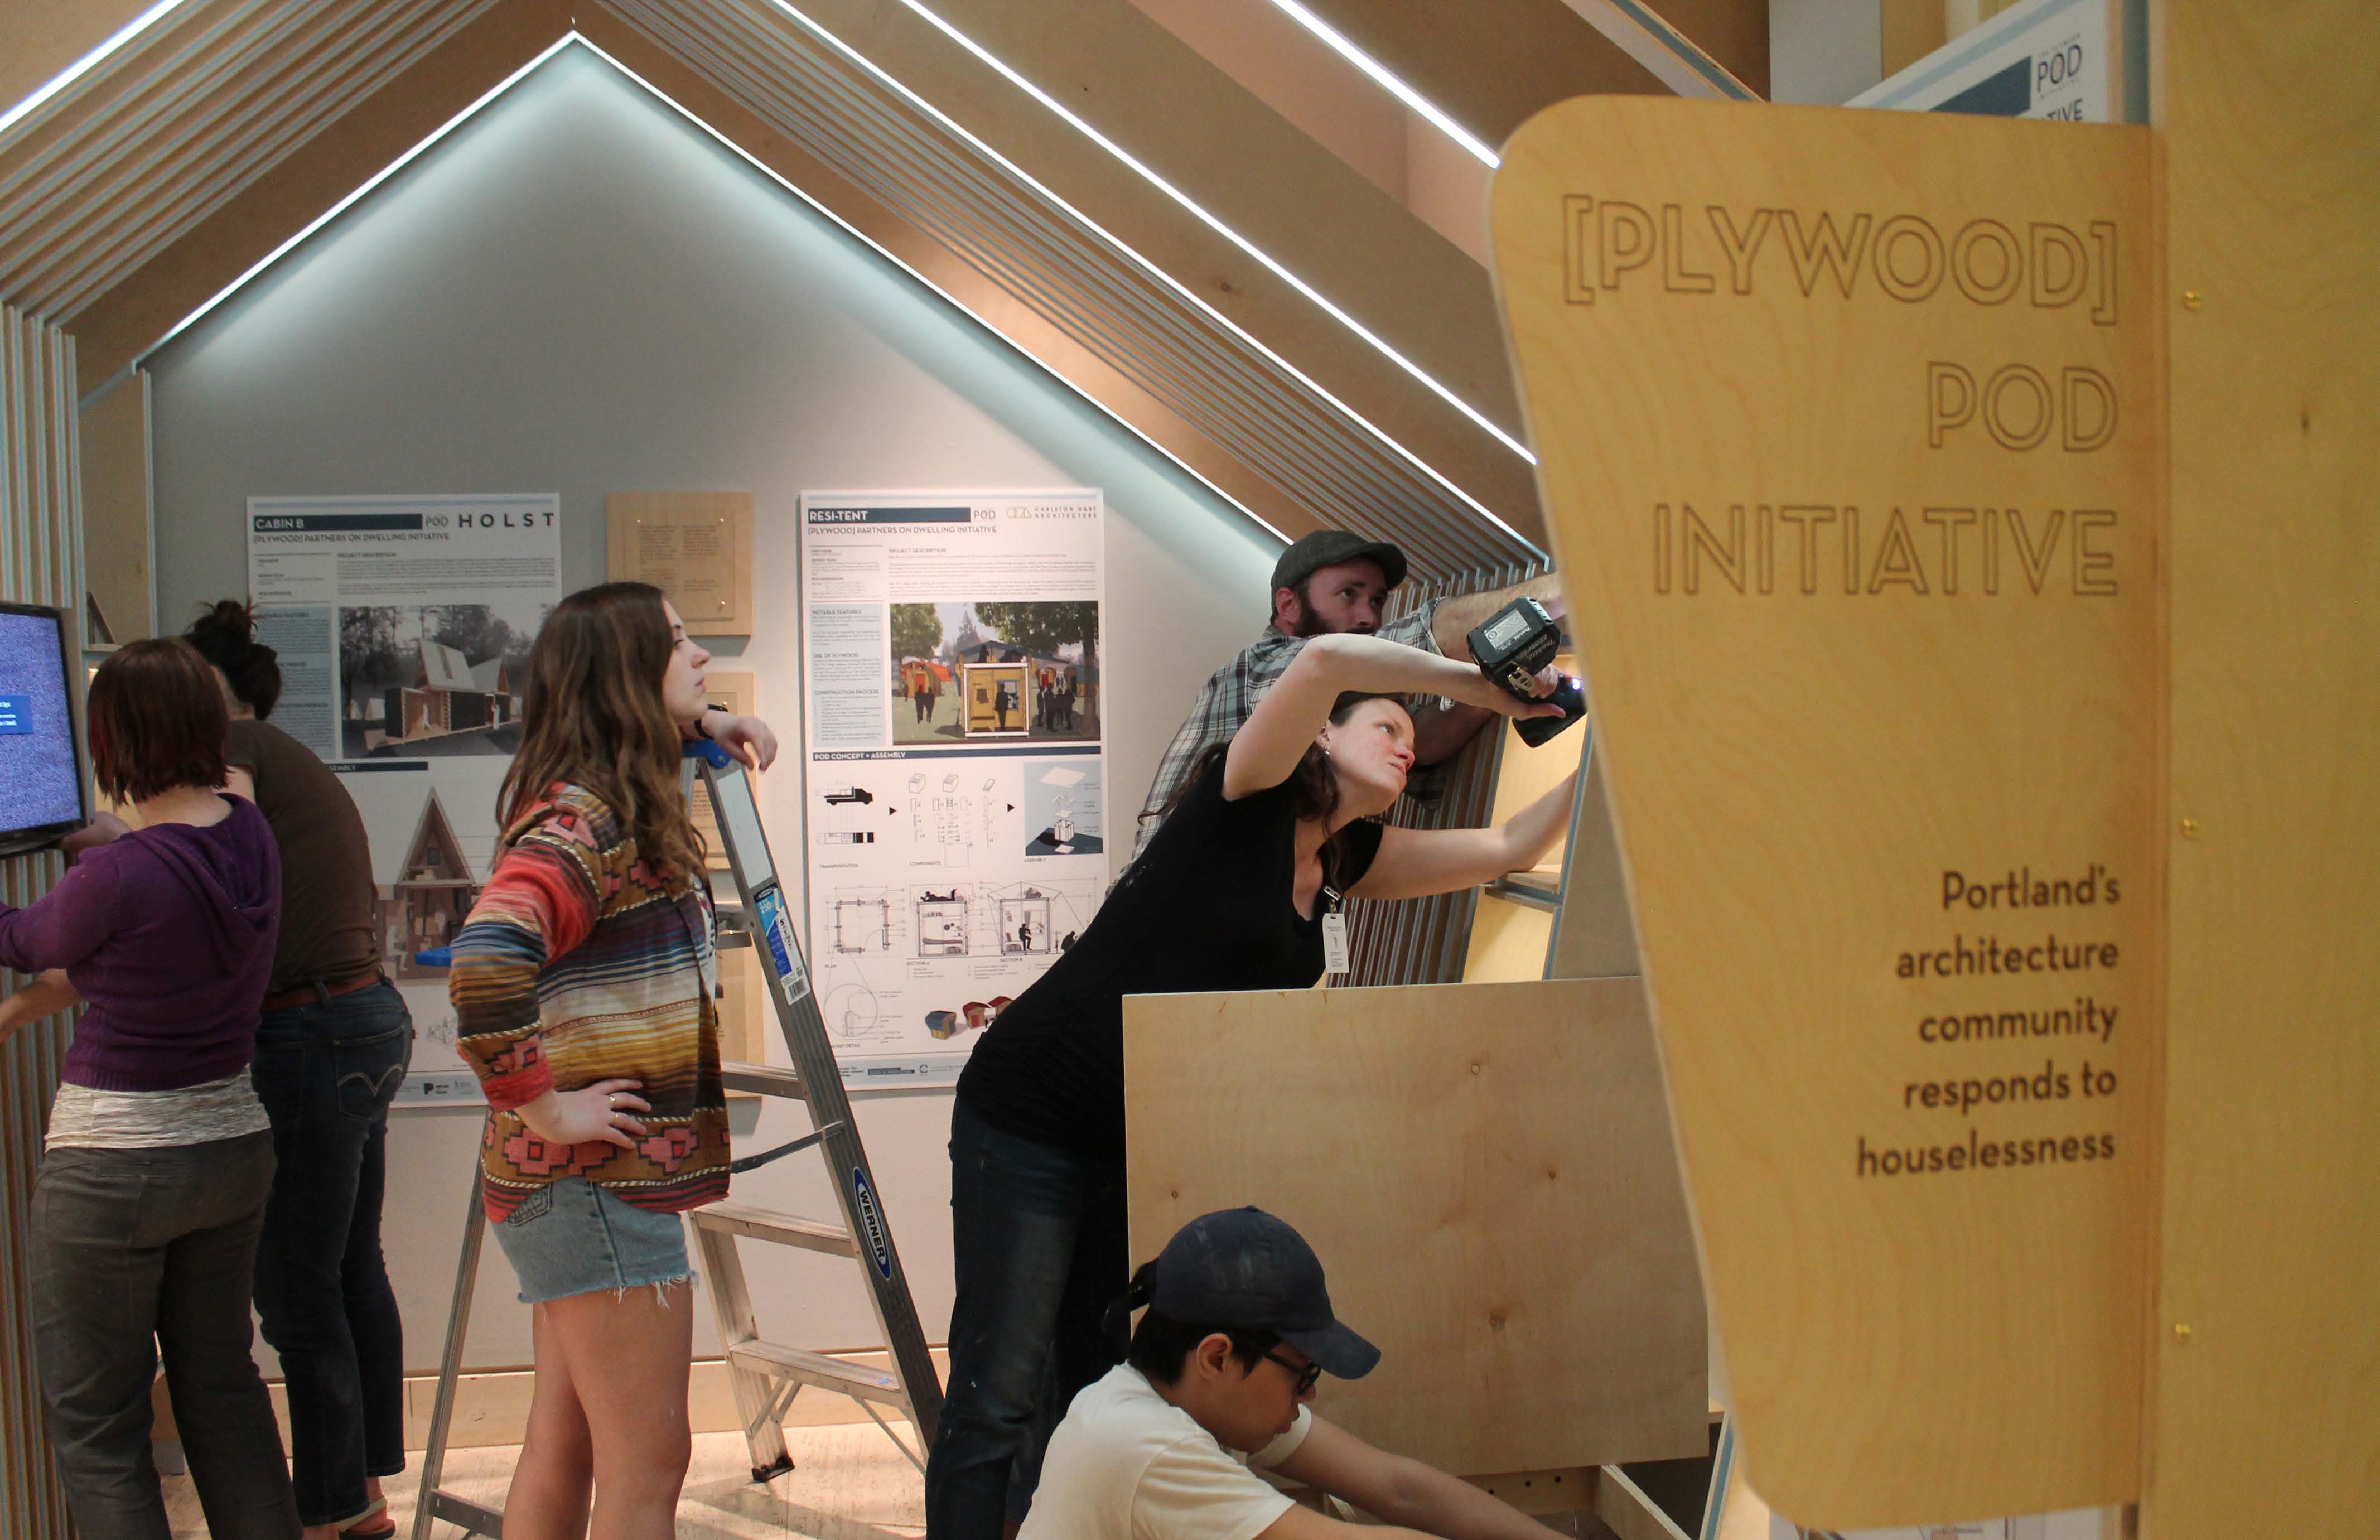 CPID students design and build an exhibit on responding to houselessness with design at the Portland Art Museum